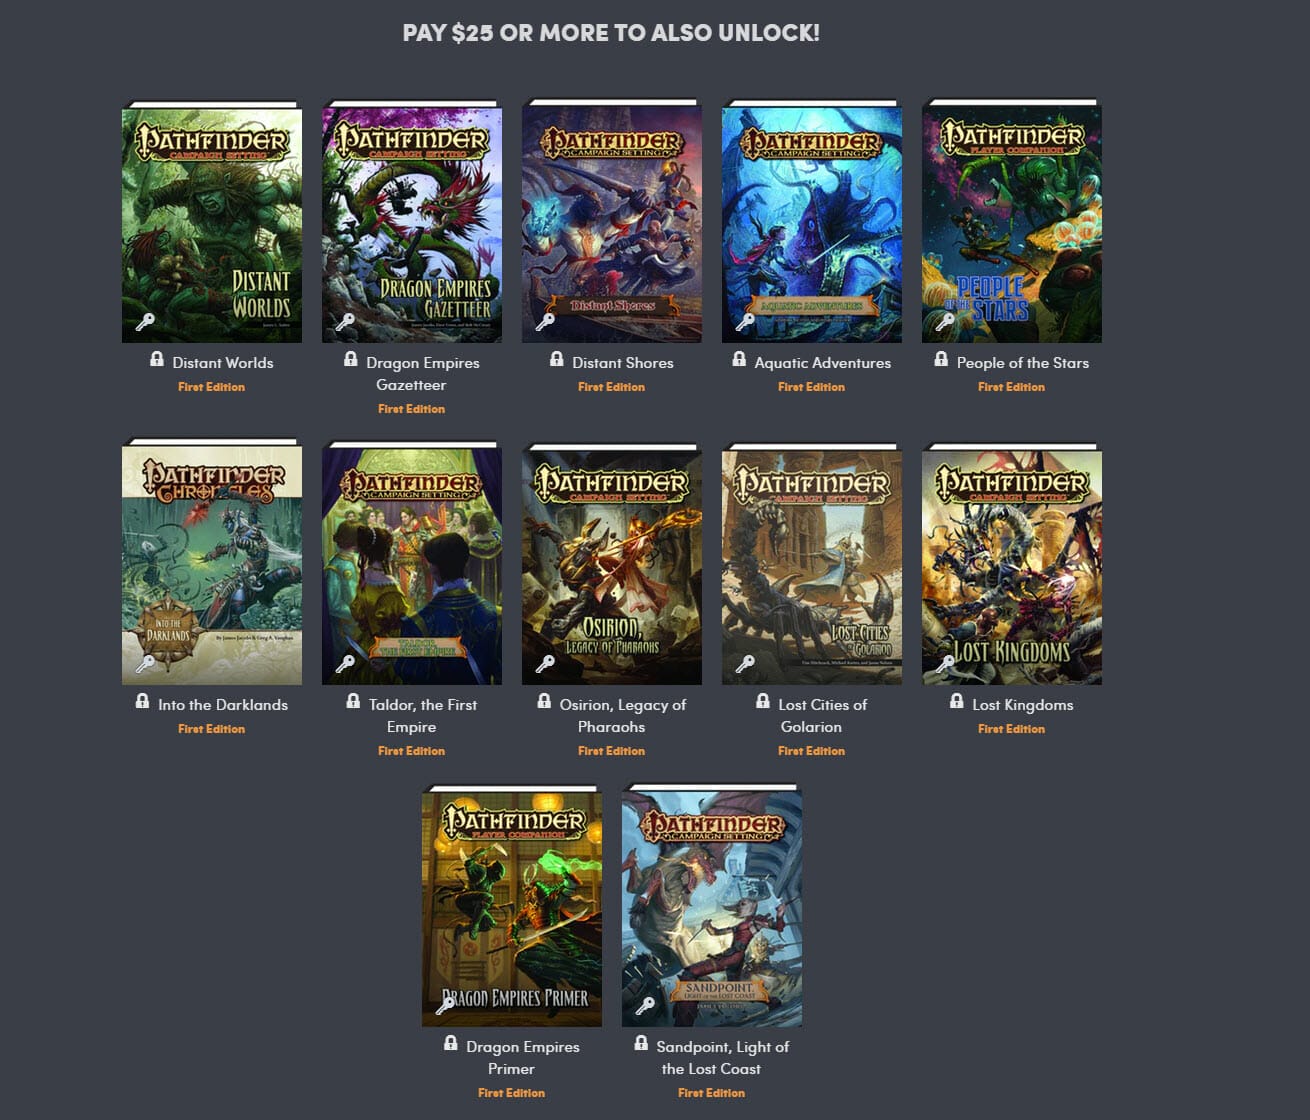 Giant Pathfinder Humble Bundle: Lost Omens Lore Archive